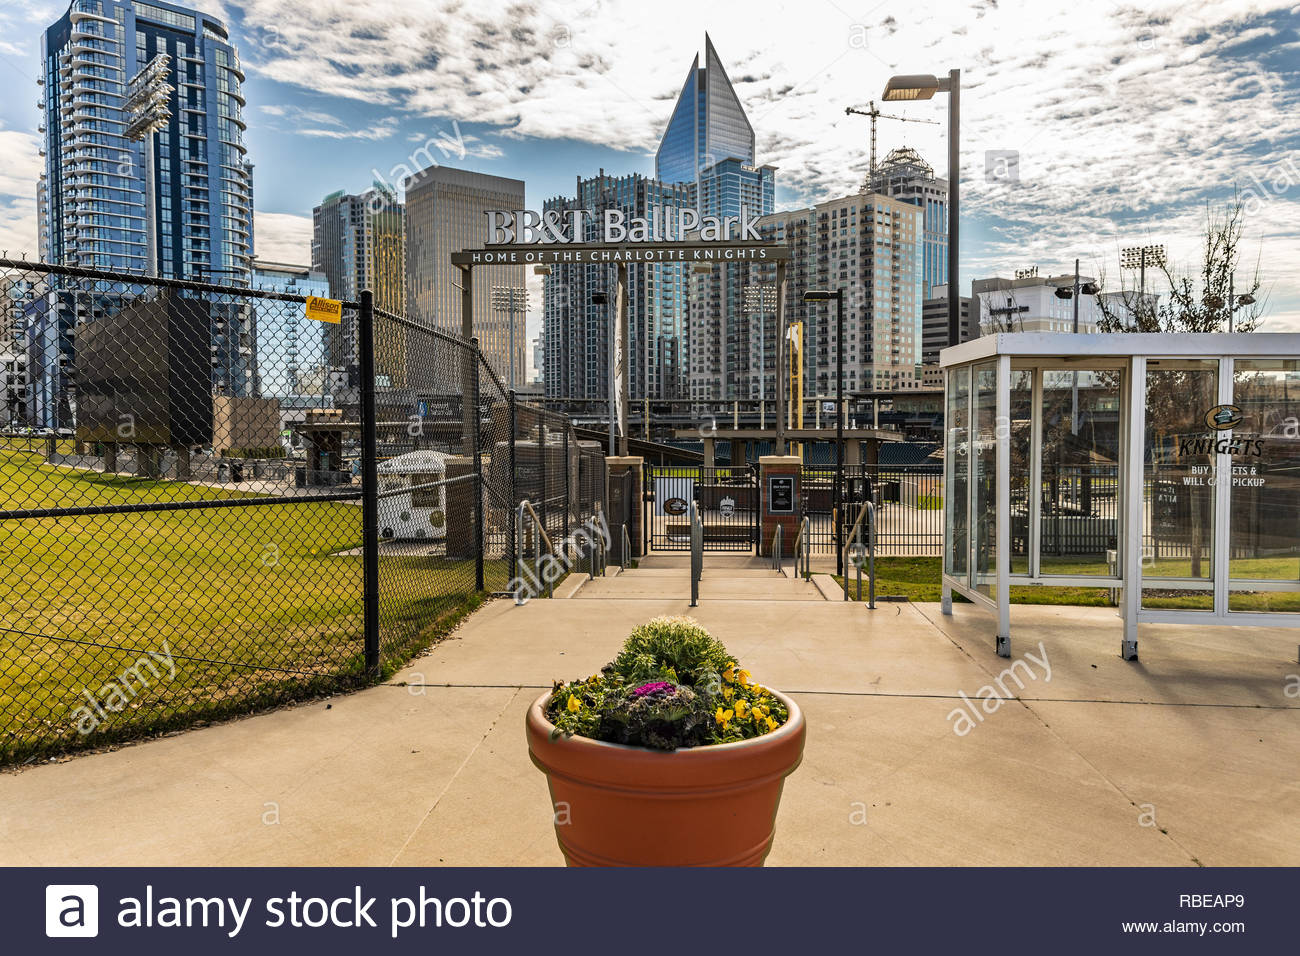 Charlotte Nc Usa The Bb T Ballpark In Uptown